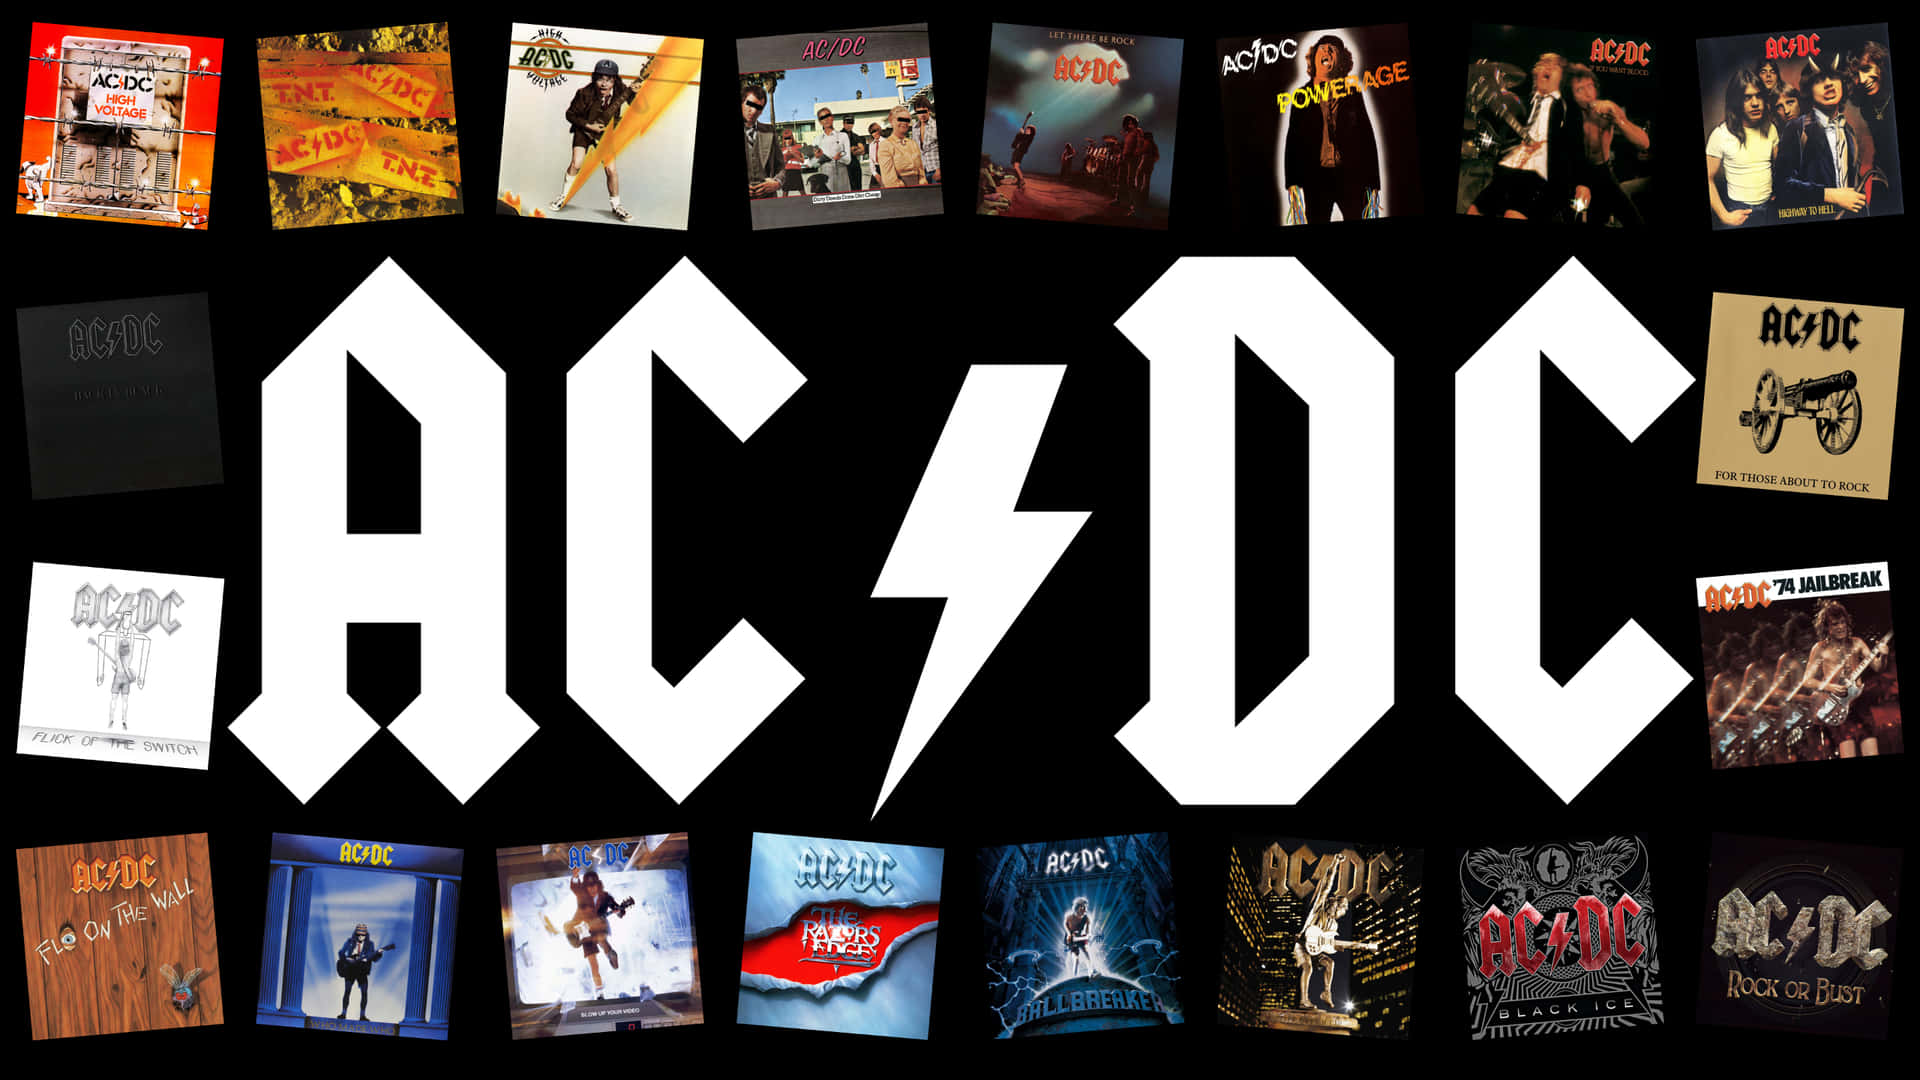 Caption: The Legends Of Rock - Ac/dc On Tour Background